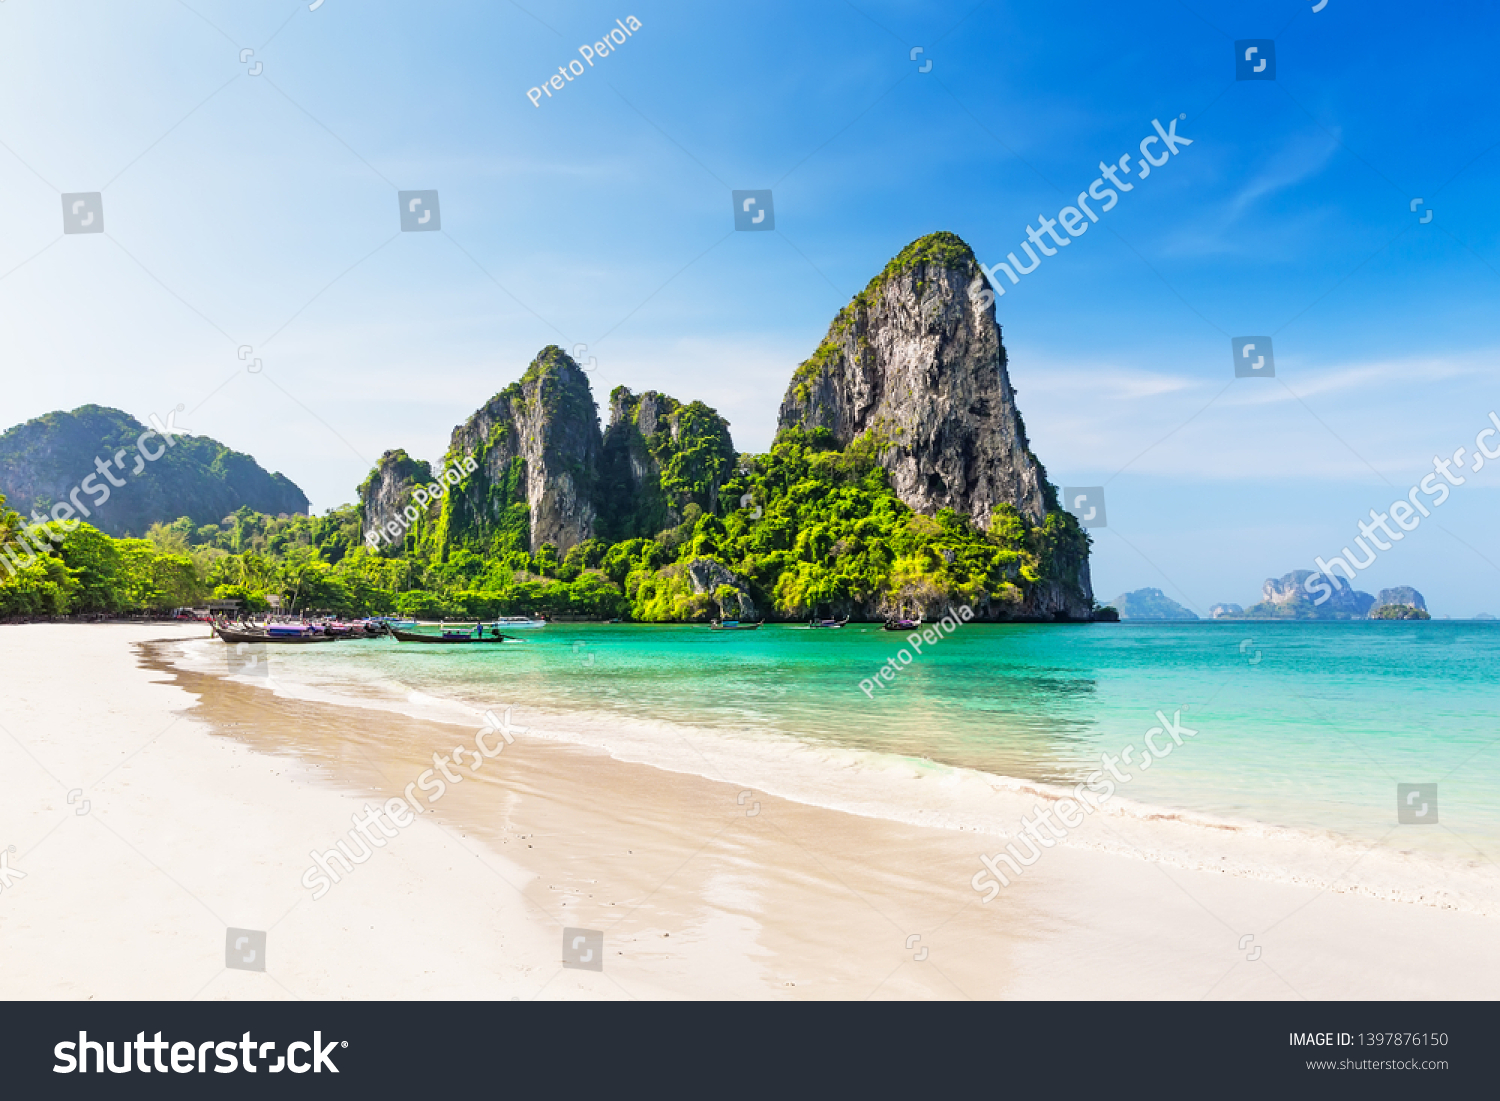 Thai traditional wooden longtail boat and beautiful sand Railay Beach in Krabi province. Ao Nang, Thailand. #1397876150